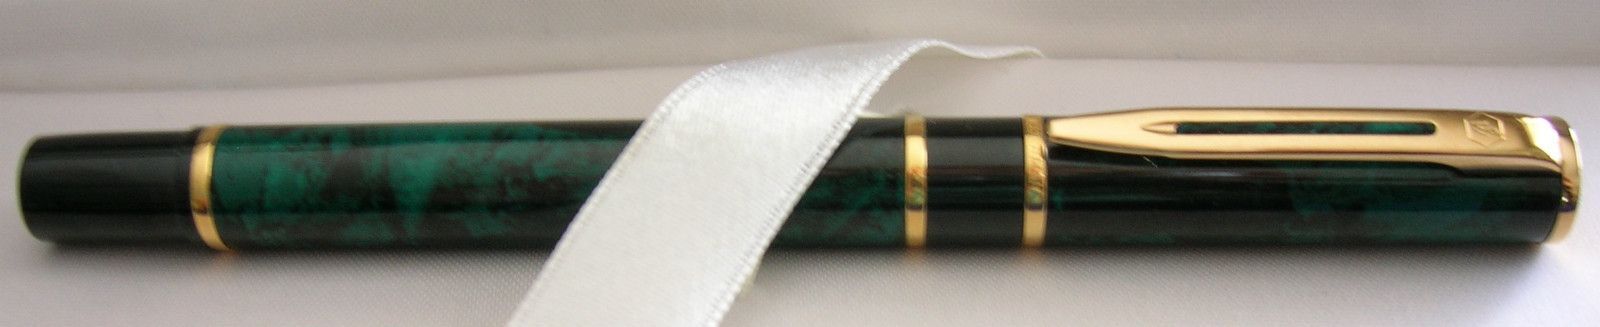 WATERMAN LAUREAT  GREEN MARBLE  FOUNTAIN PEN  MED PT NEW  IN BOX ENGRAVED M.R.T 